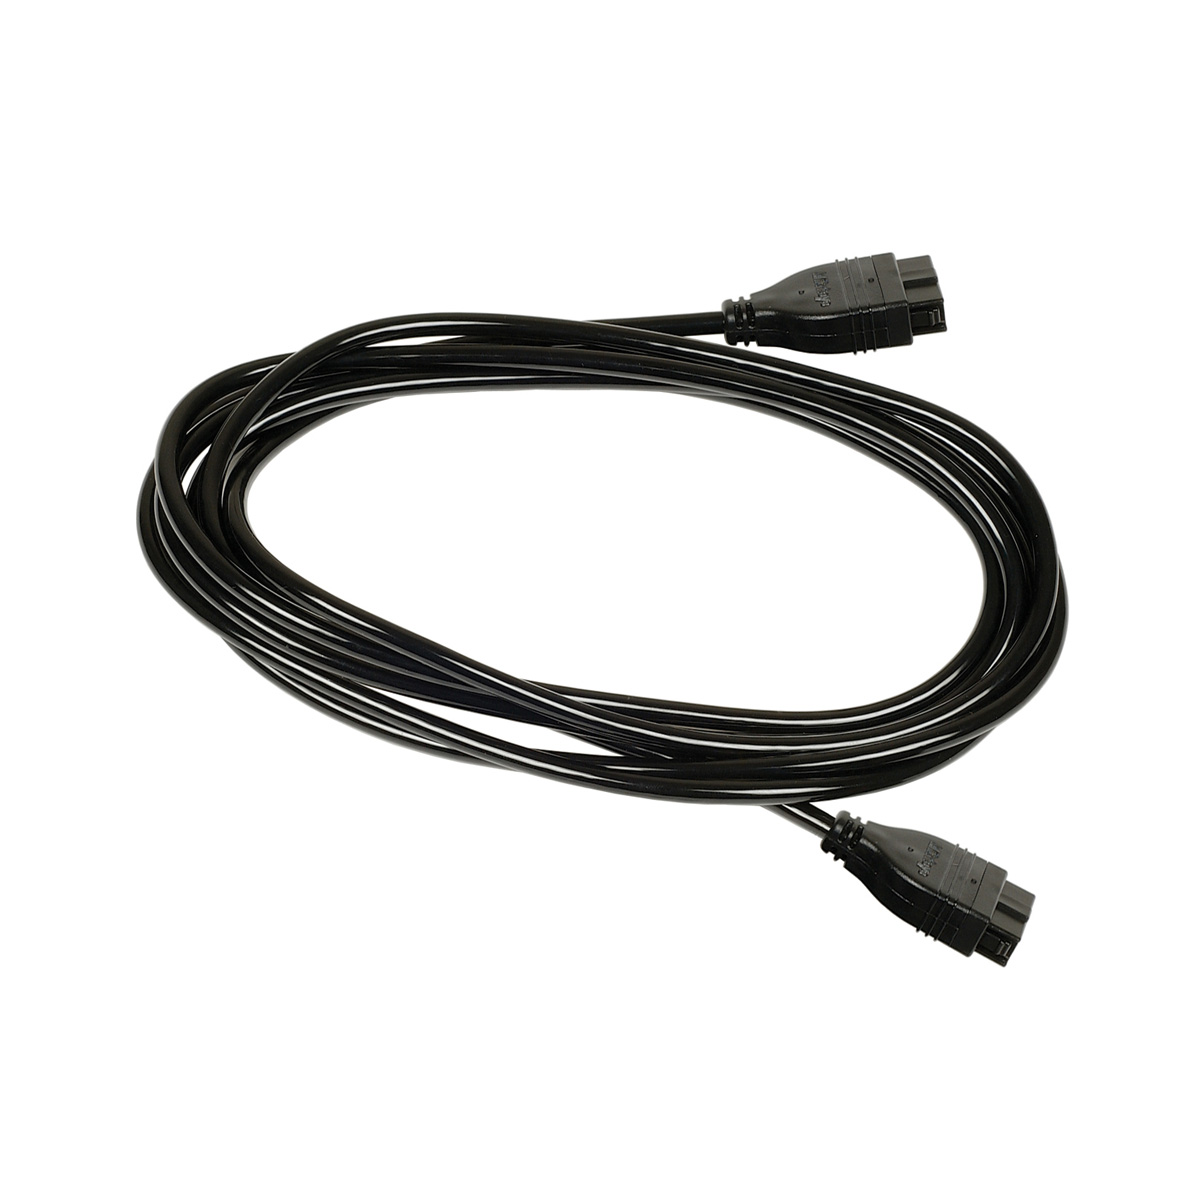 Picture of Mitutoyo 965014 80 in. SPC Connecting Cable with 2M Pins Standard Type